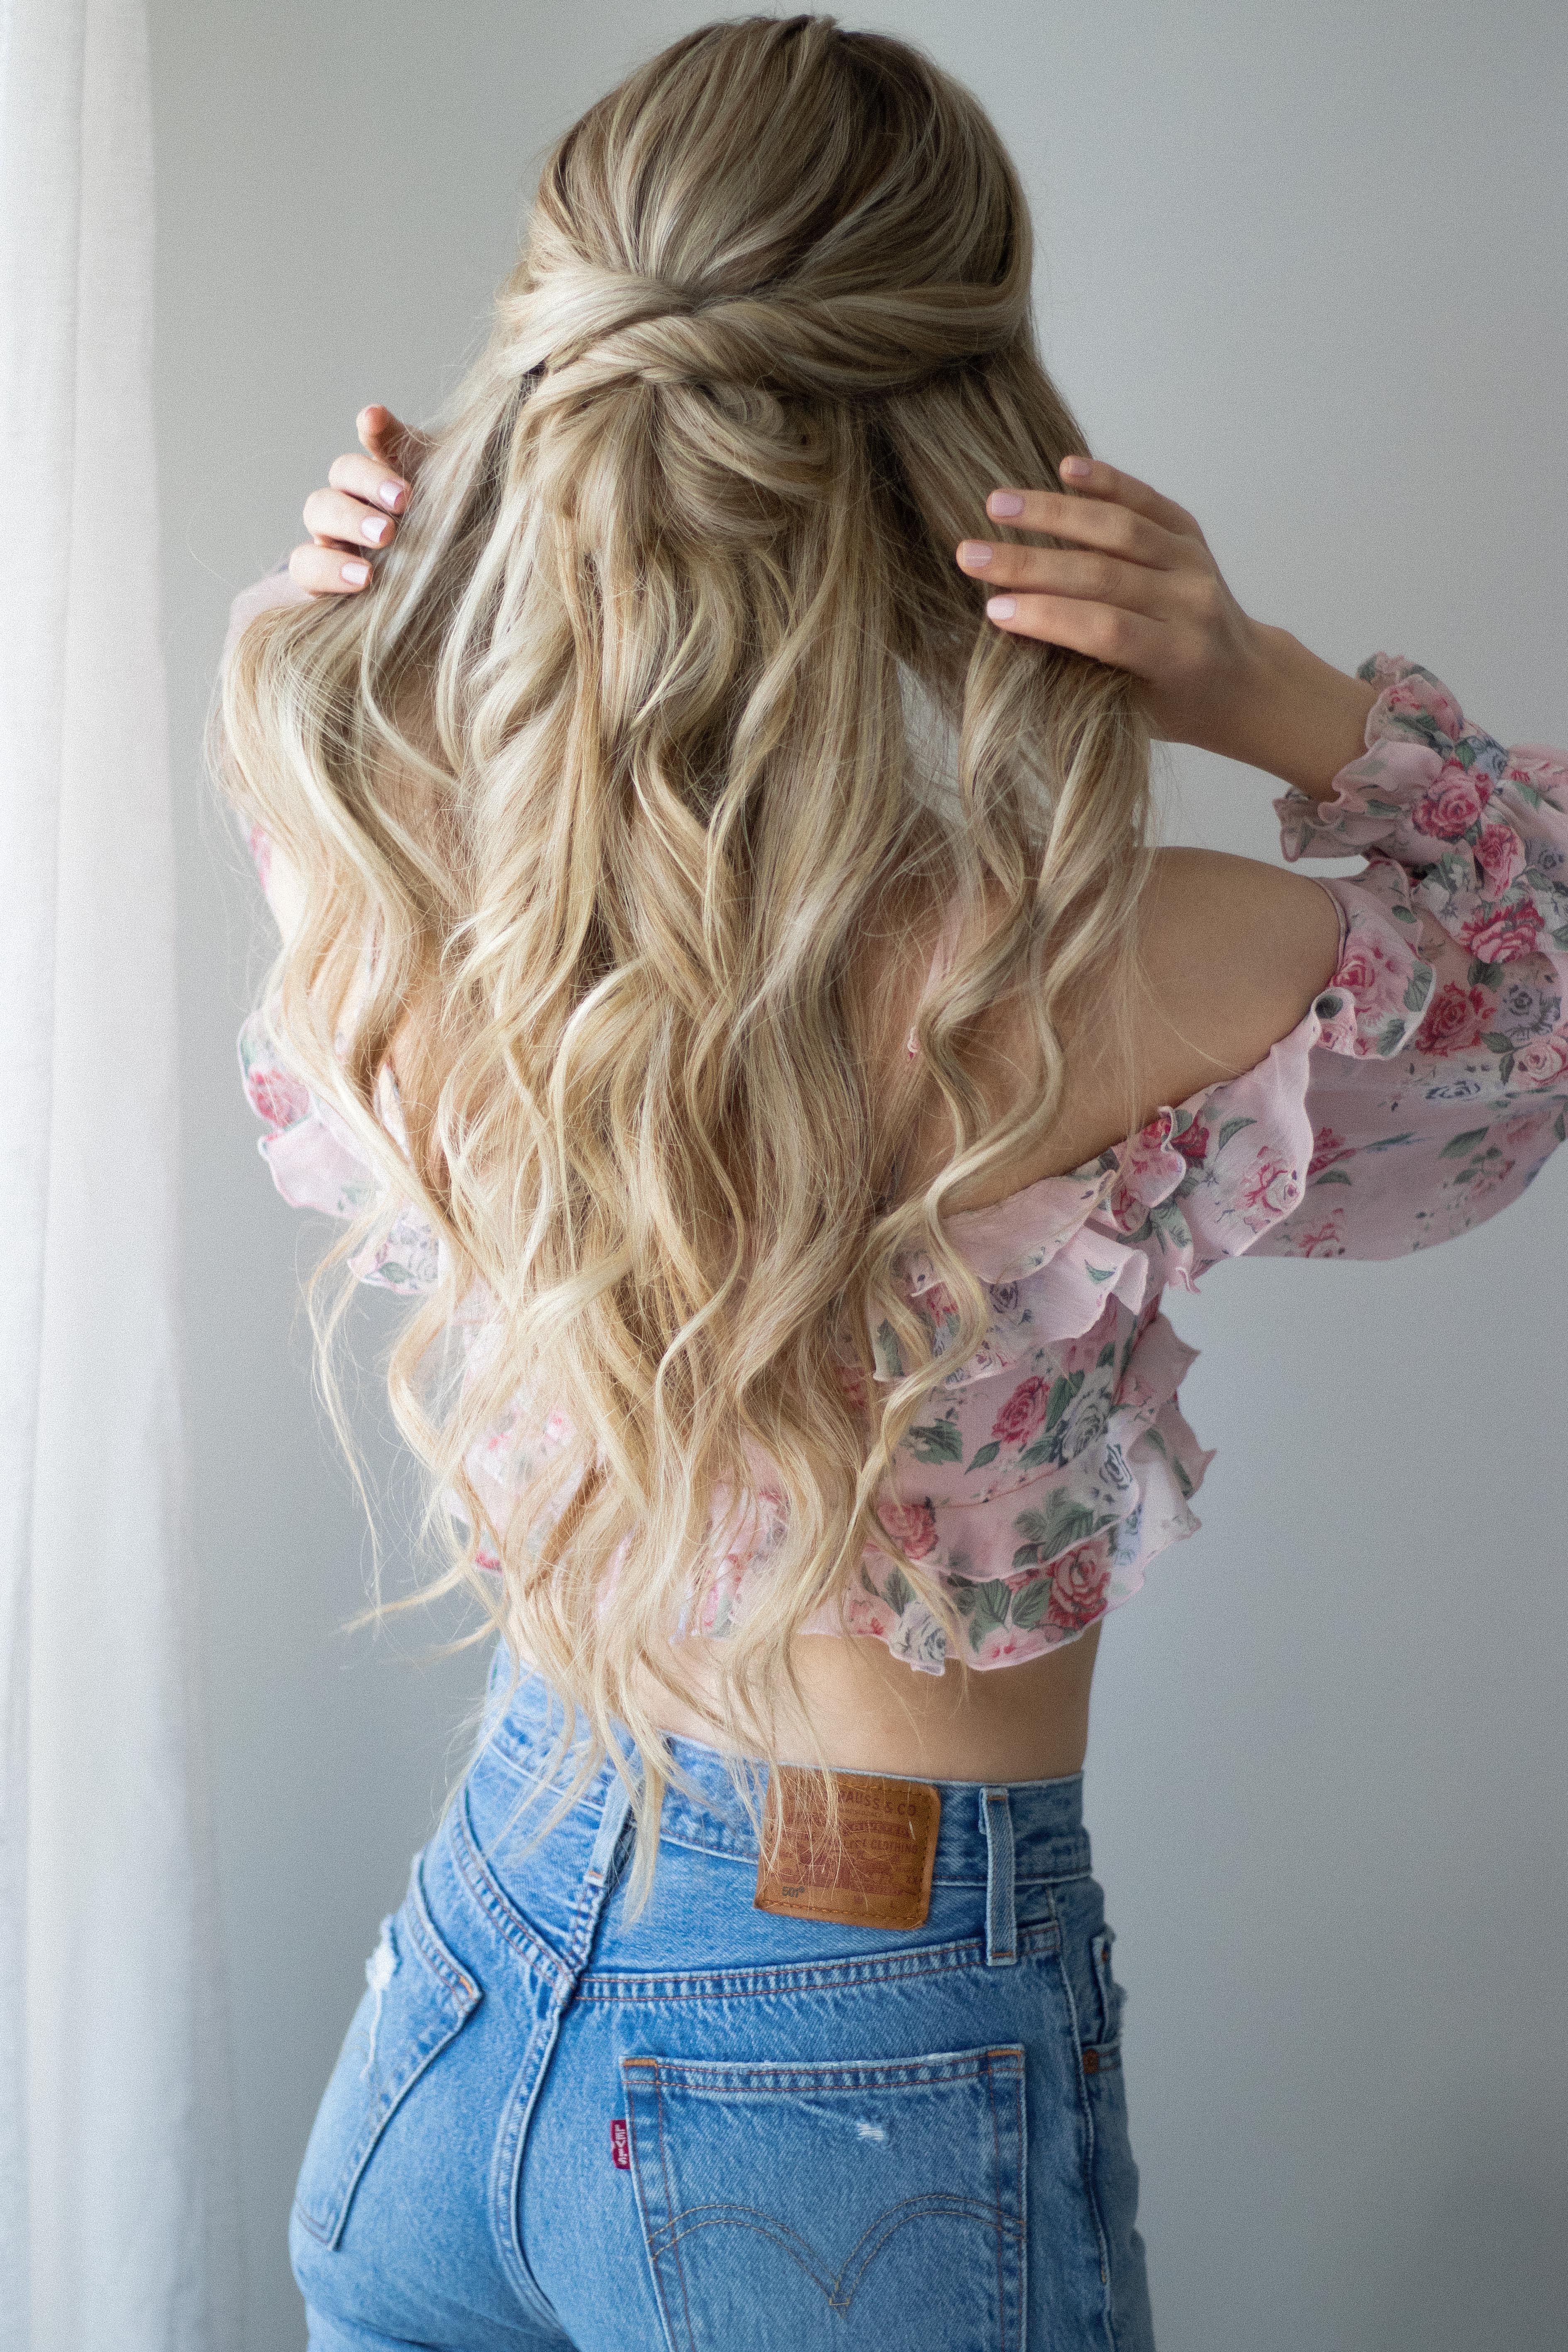 Summer Hairstyle Ideas Tutorial - Best Hairstyles Ideas for Women and ...